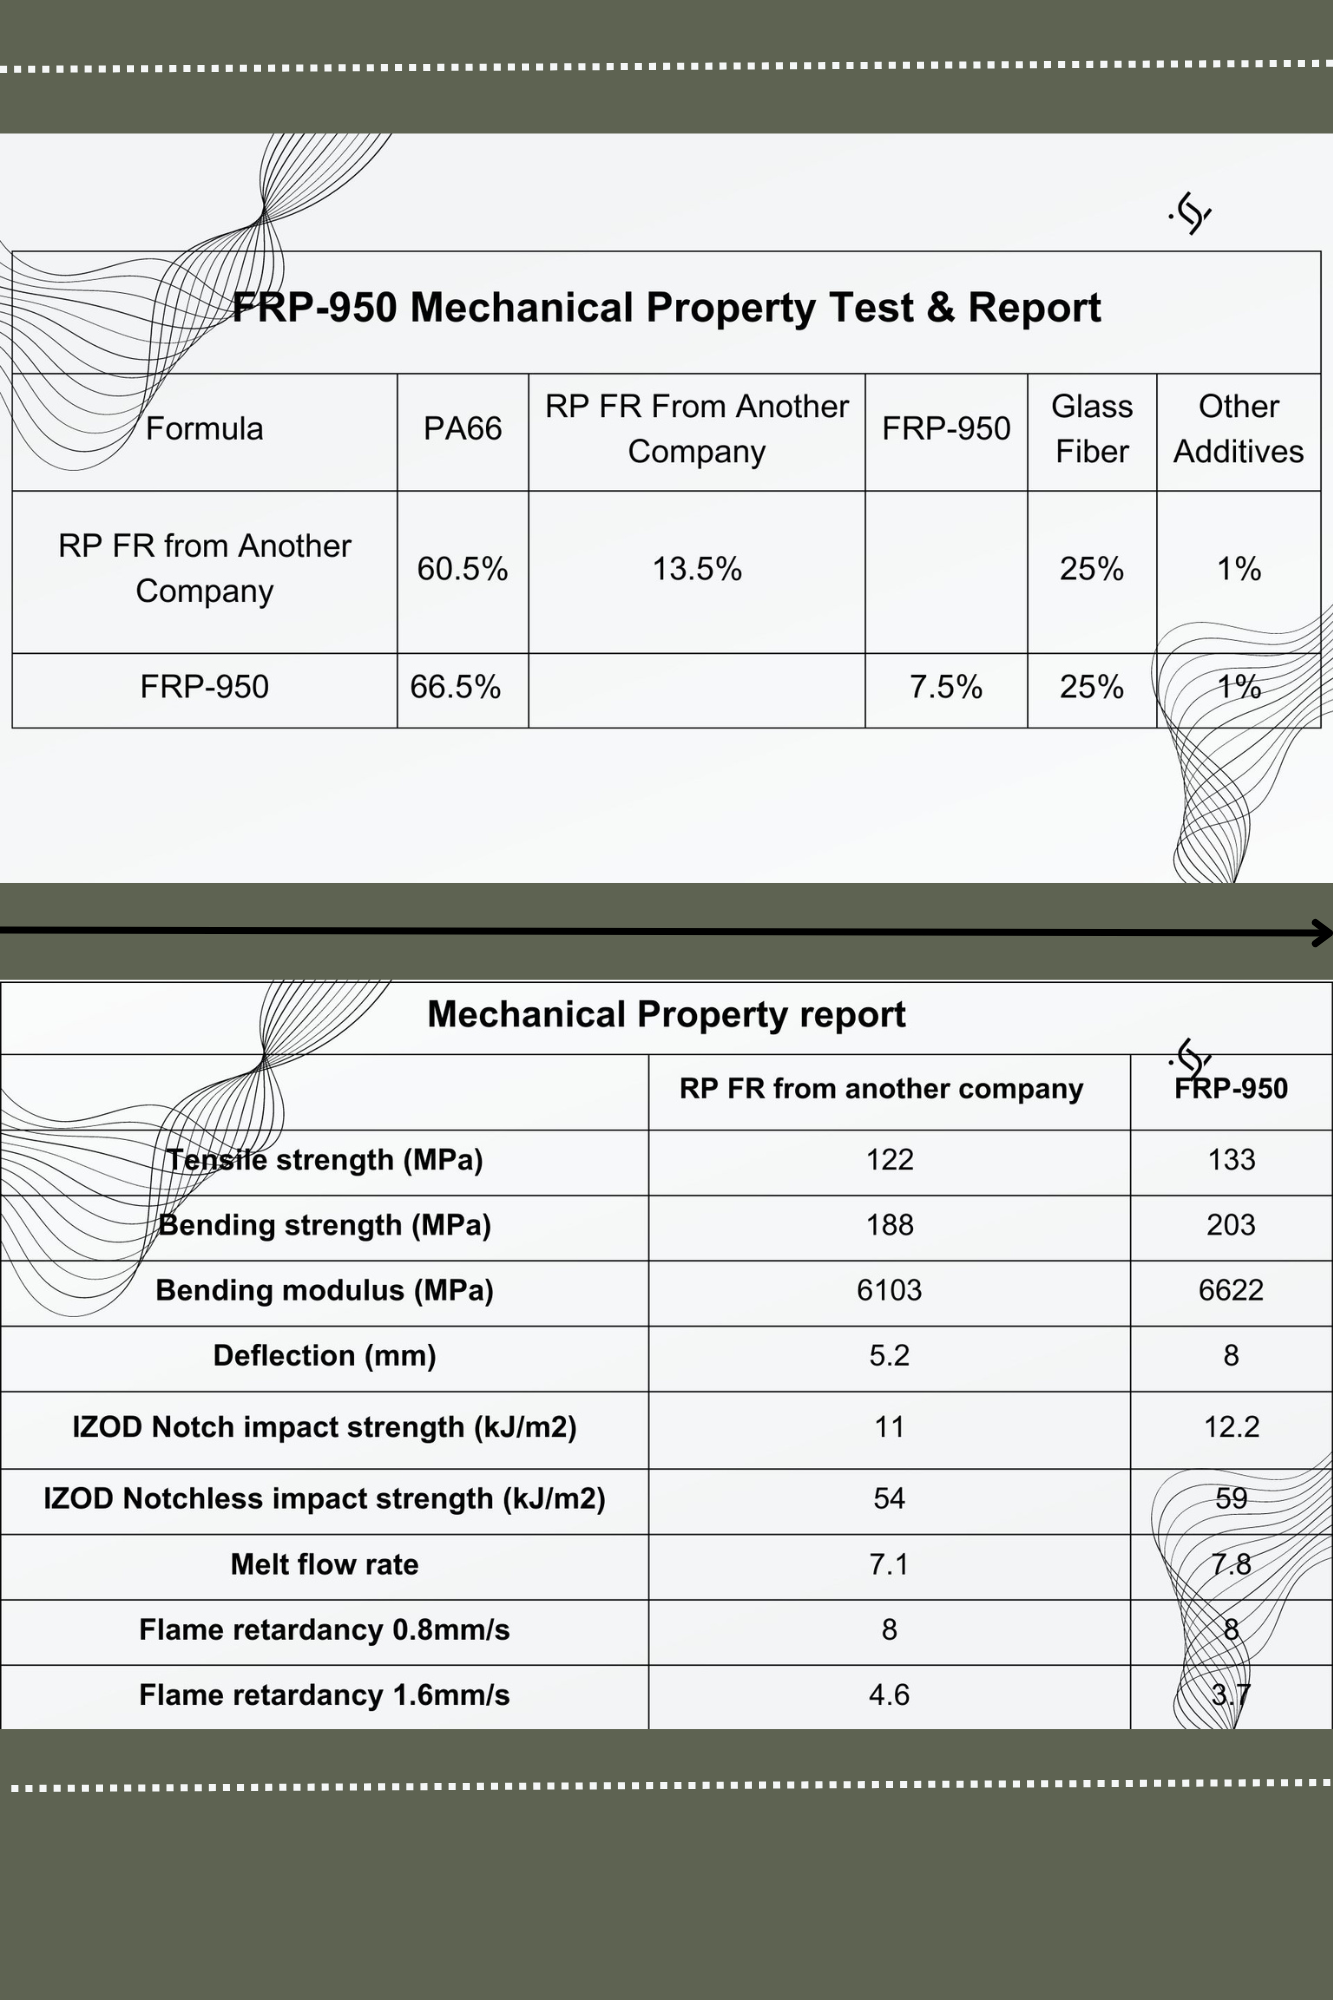 5.9 FRP-950 Mechanical Property Test & Report